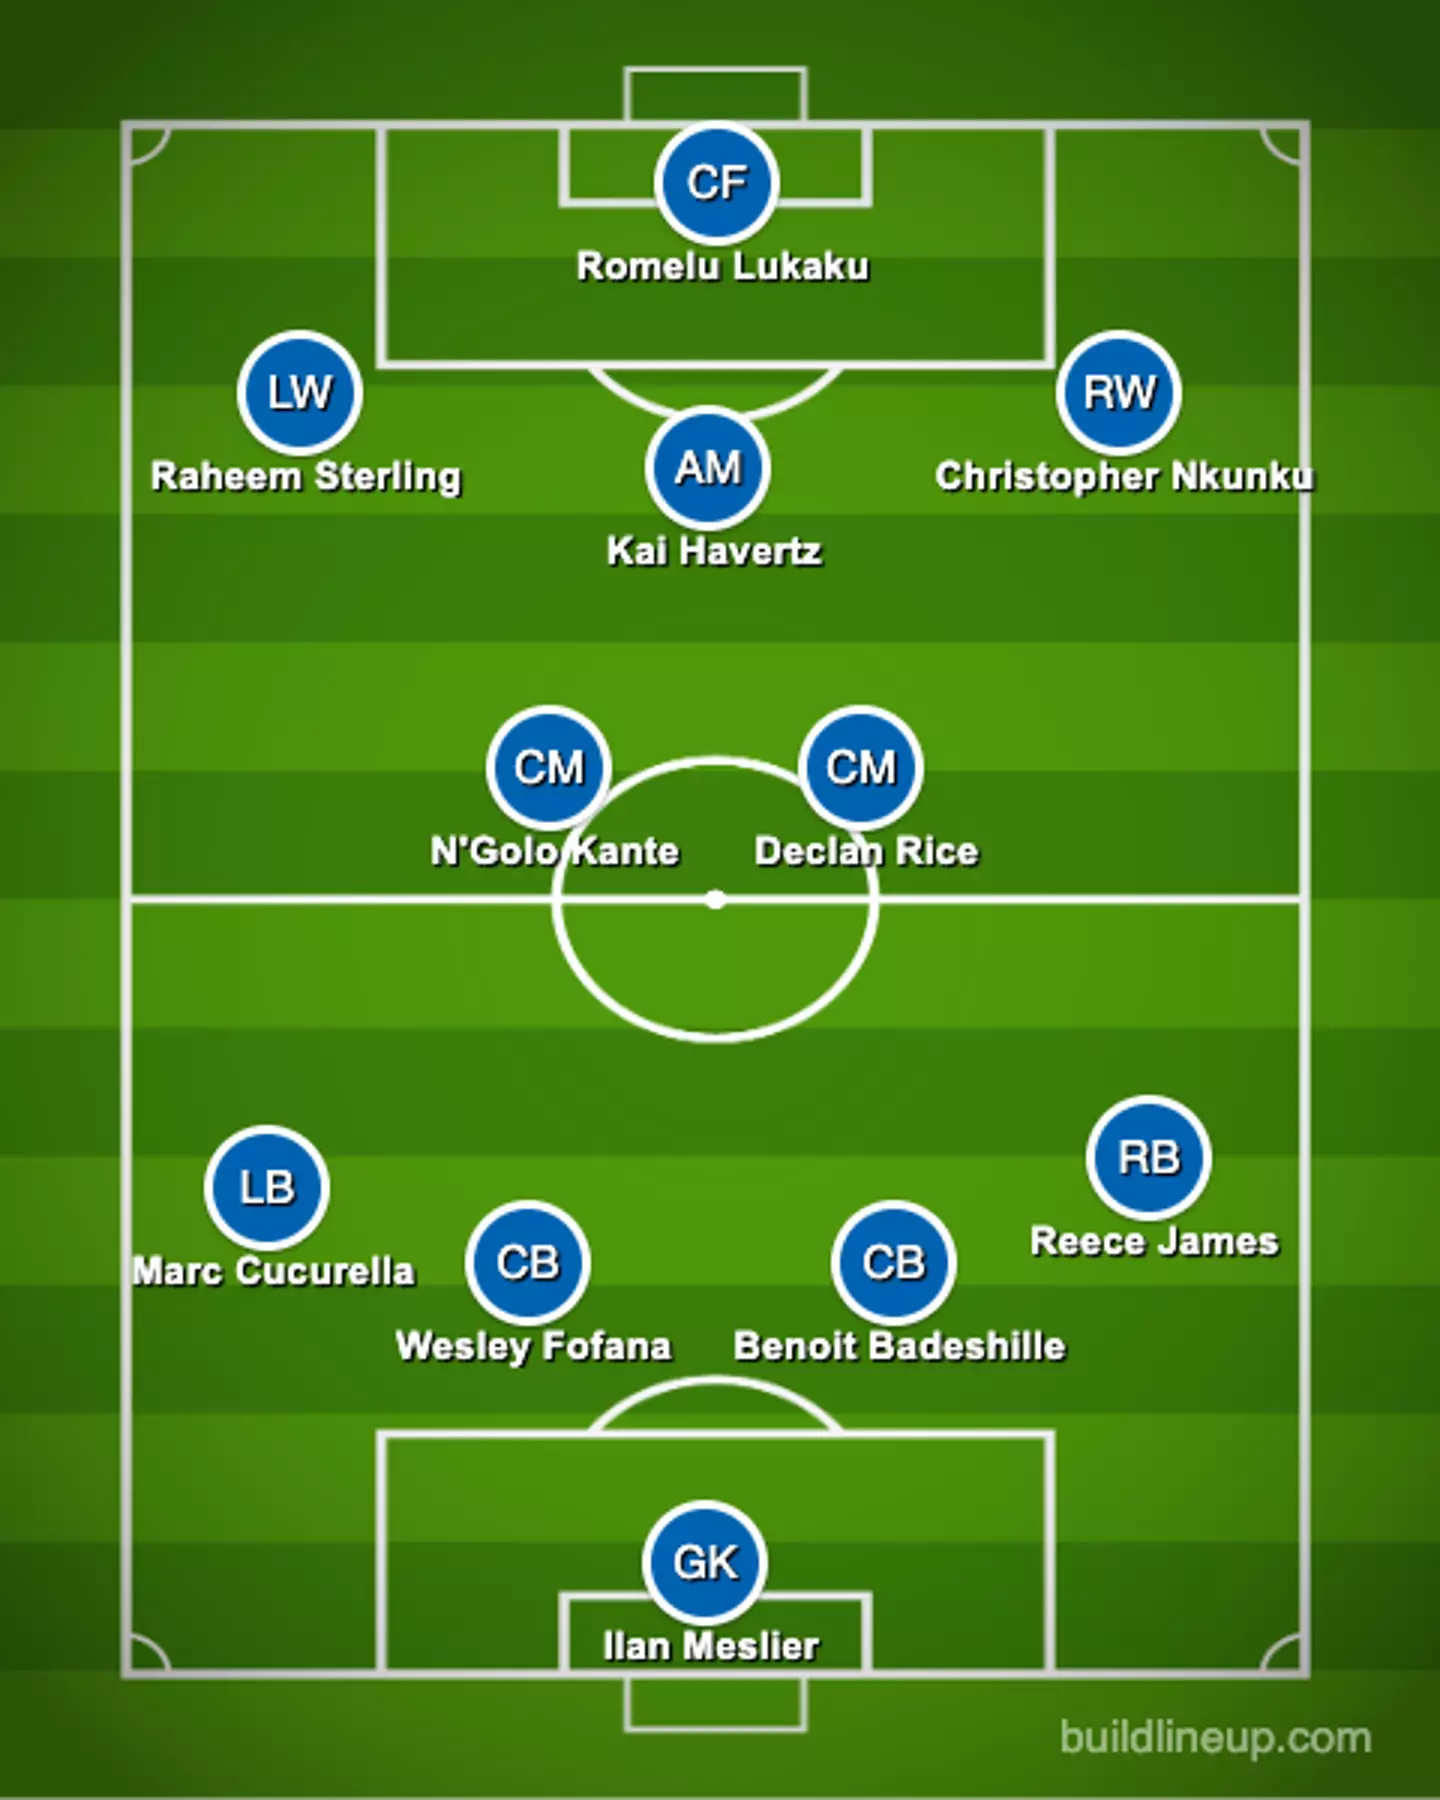 And what if Chelsea make some more big deals in the summer. Image: buildlineup